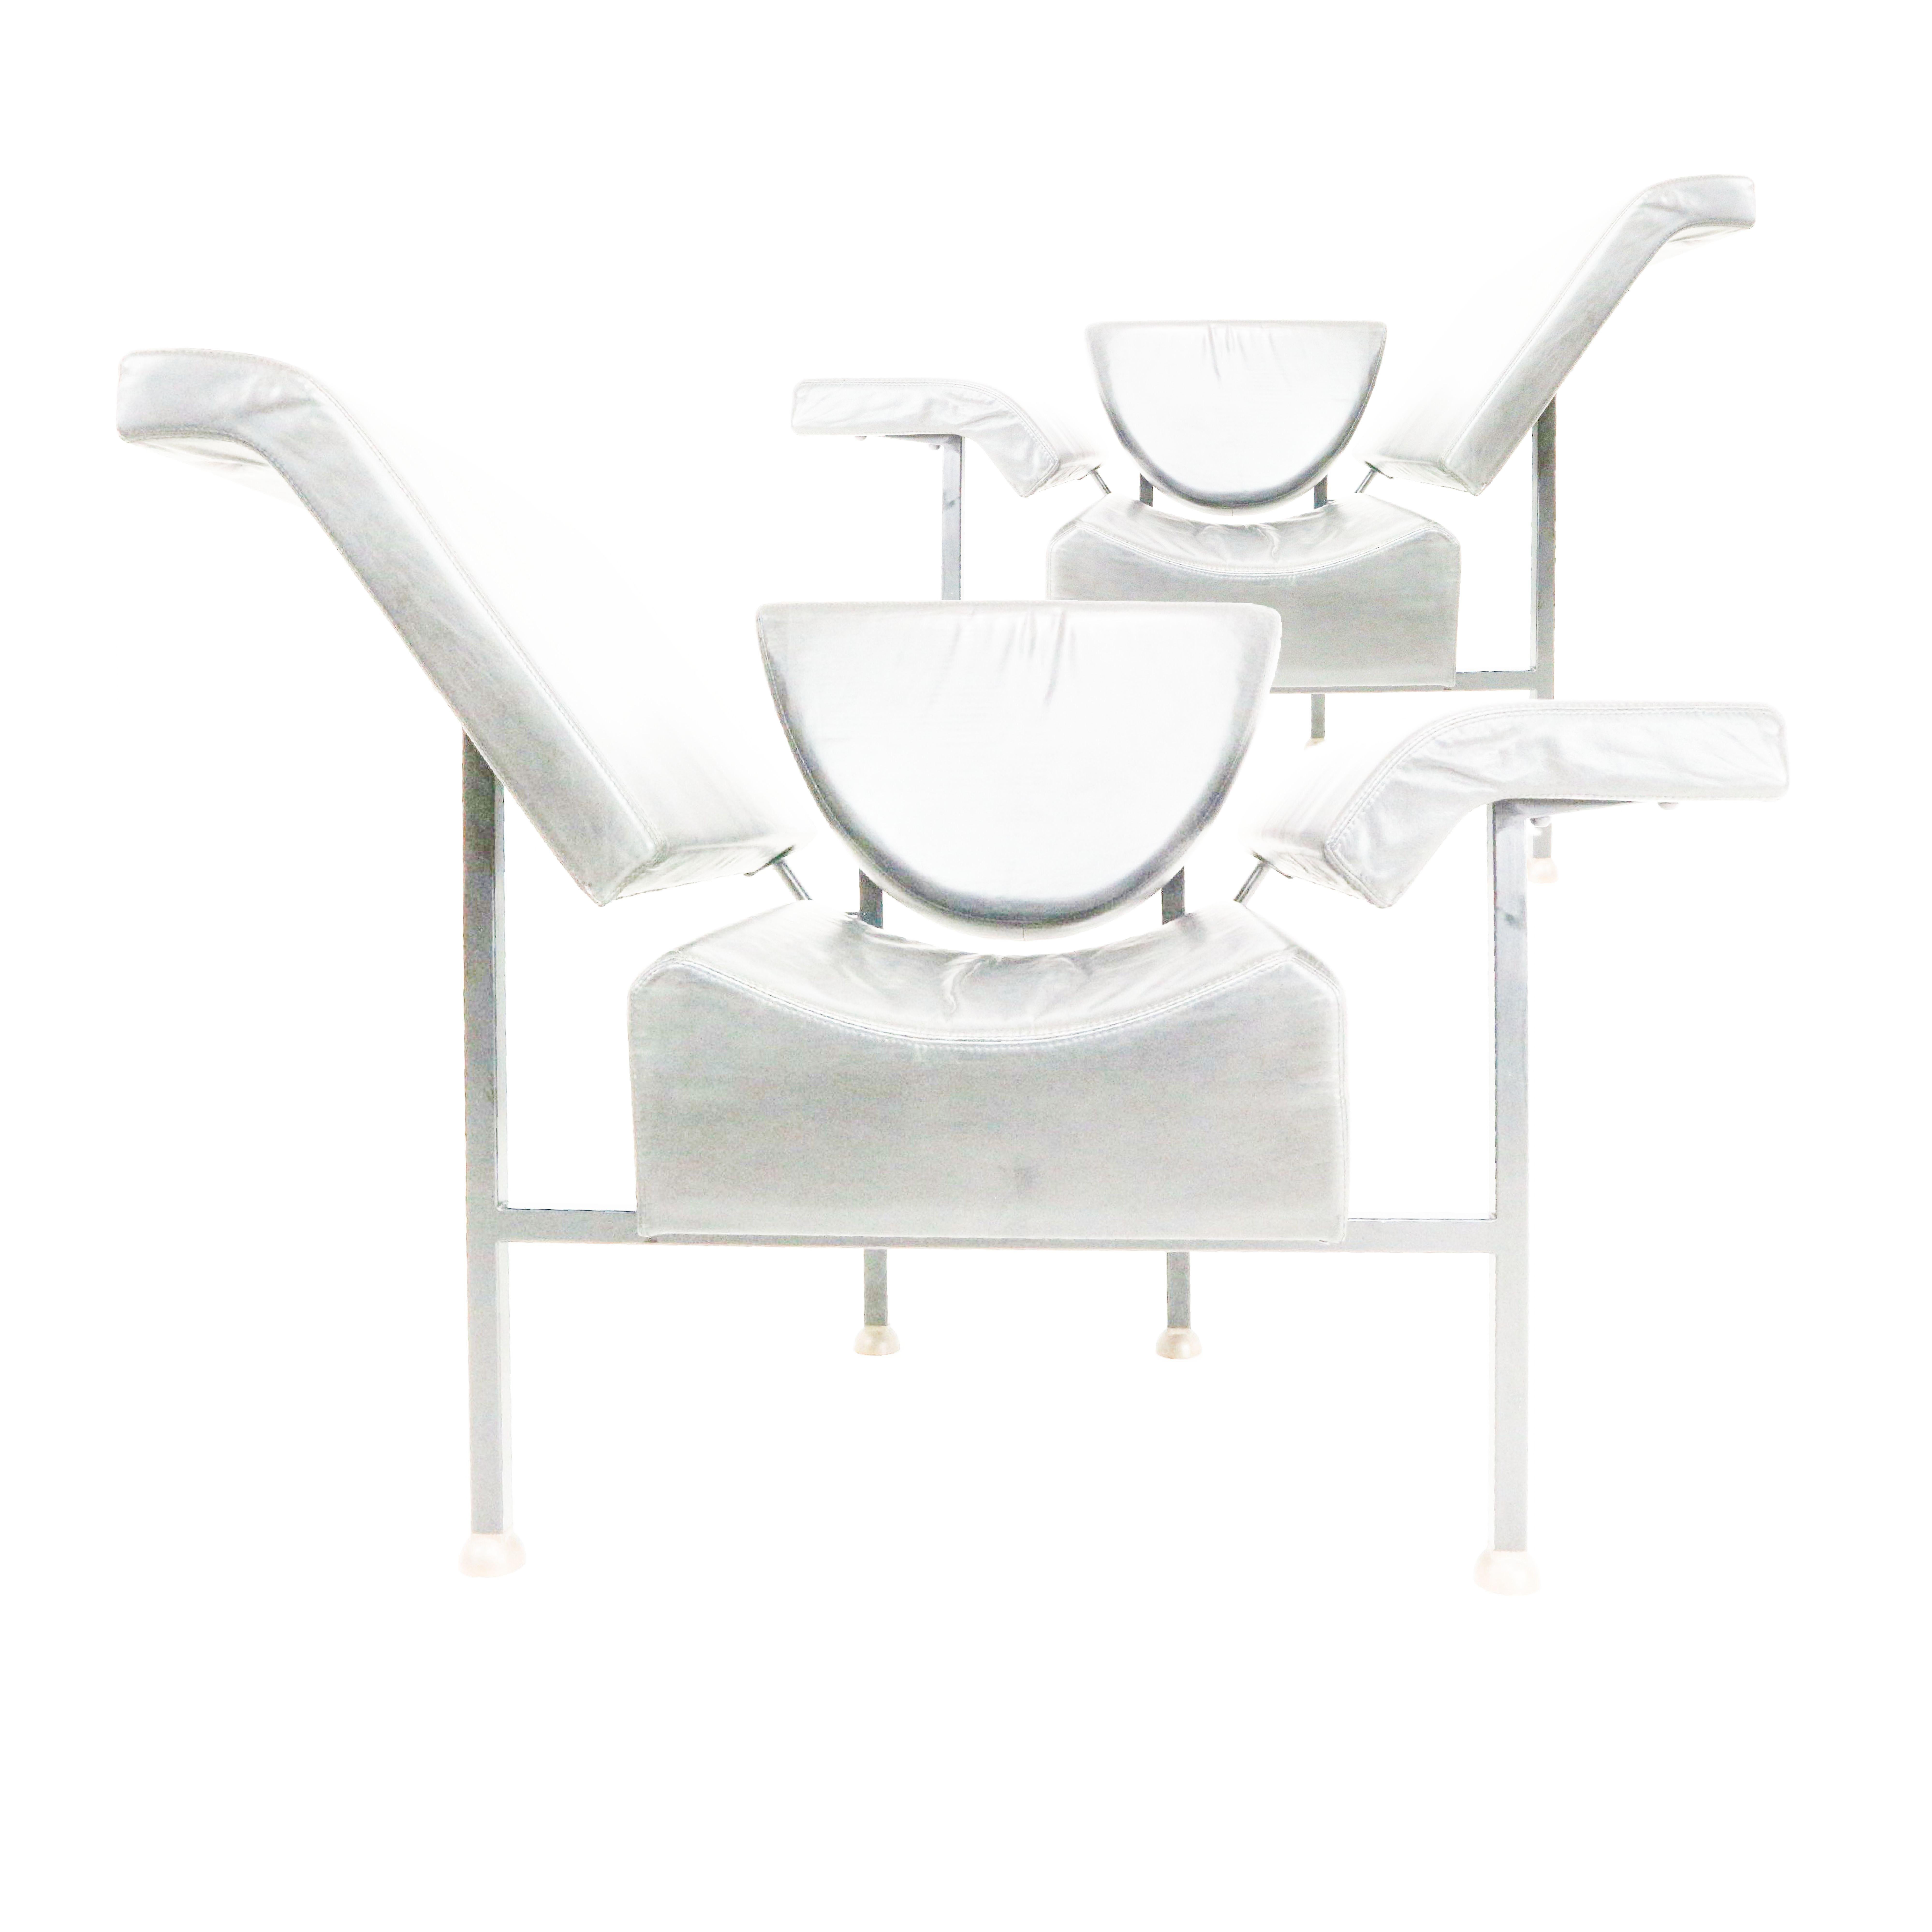 Post-Modern Greetings from Holland Armchair Lounge by Rob Eckhardt 1982, Dutch Postmodern